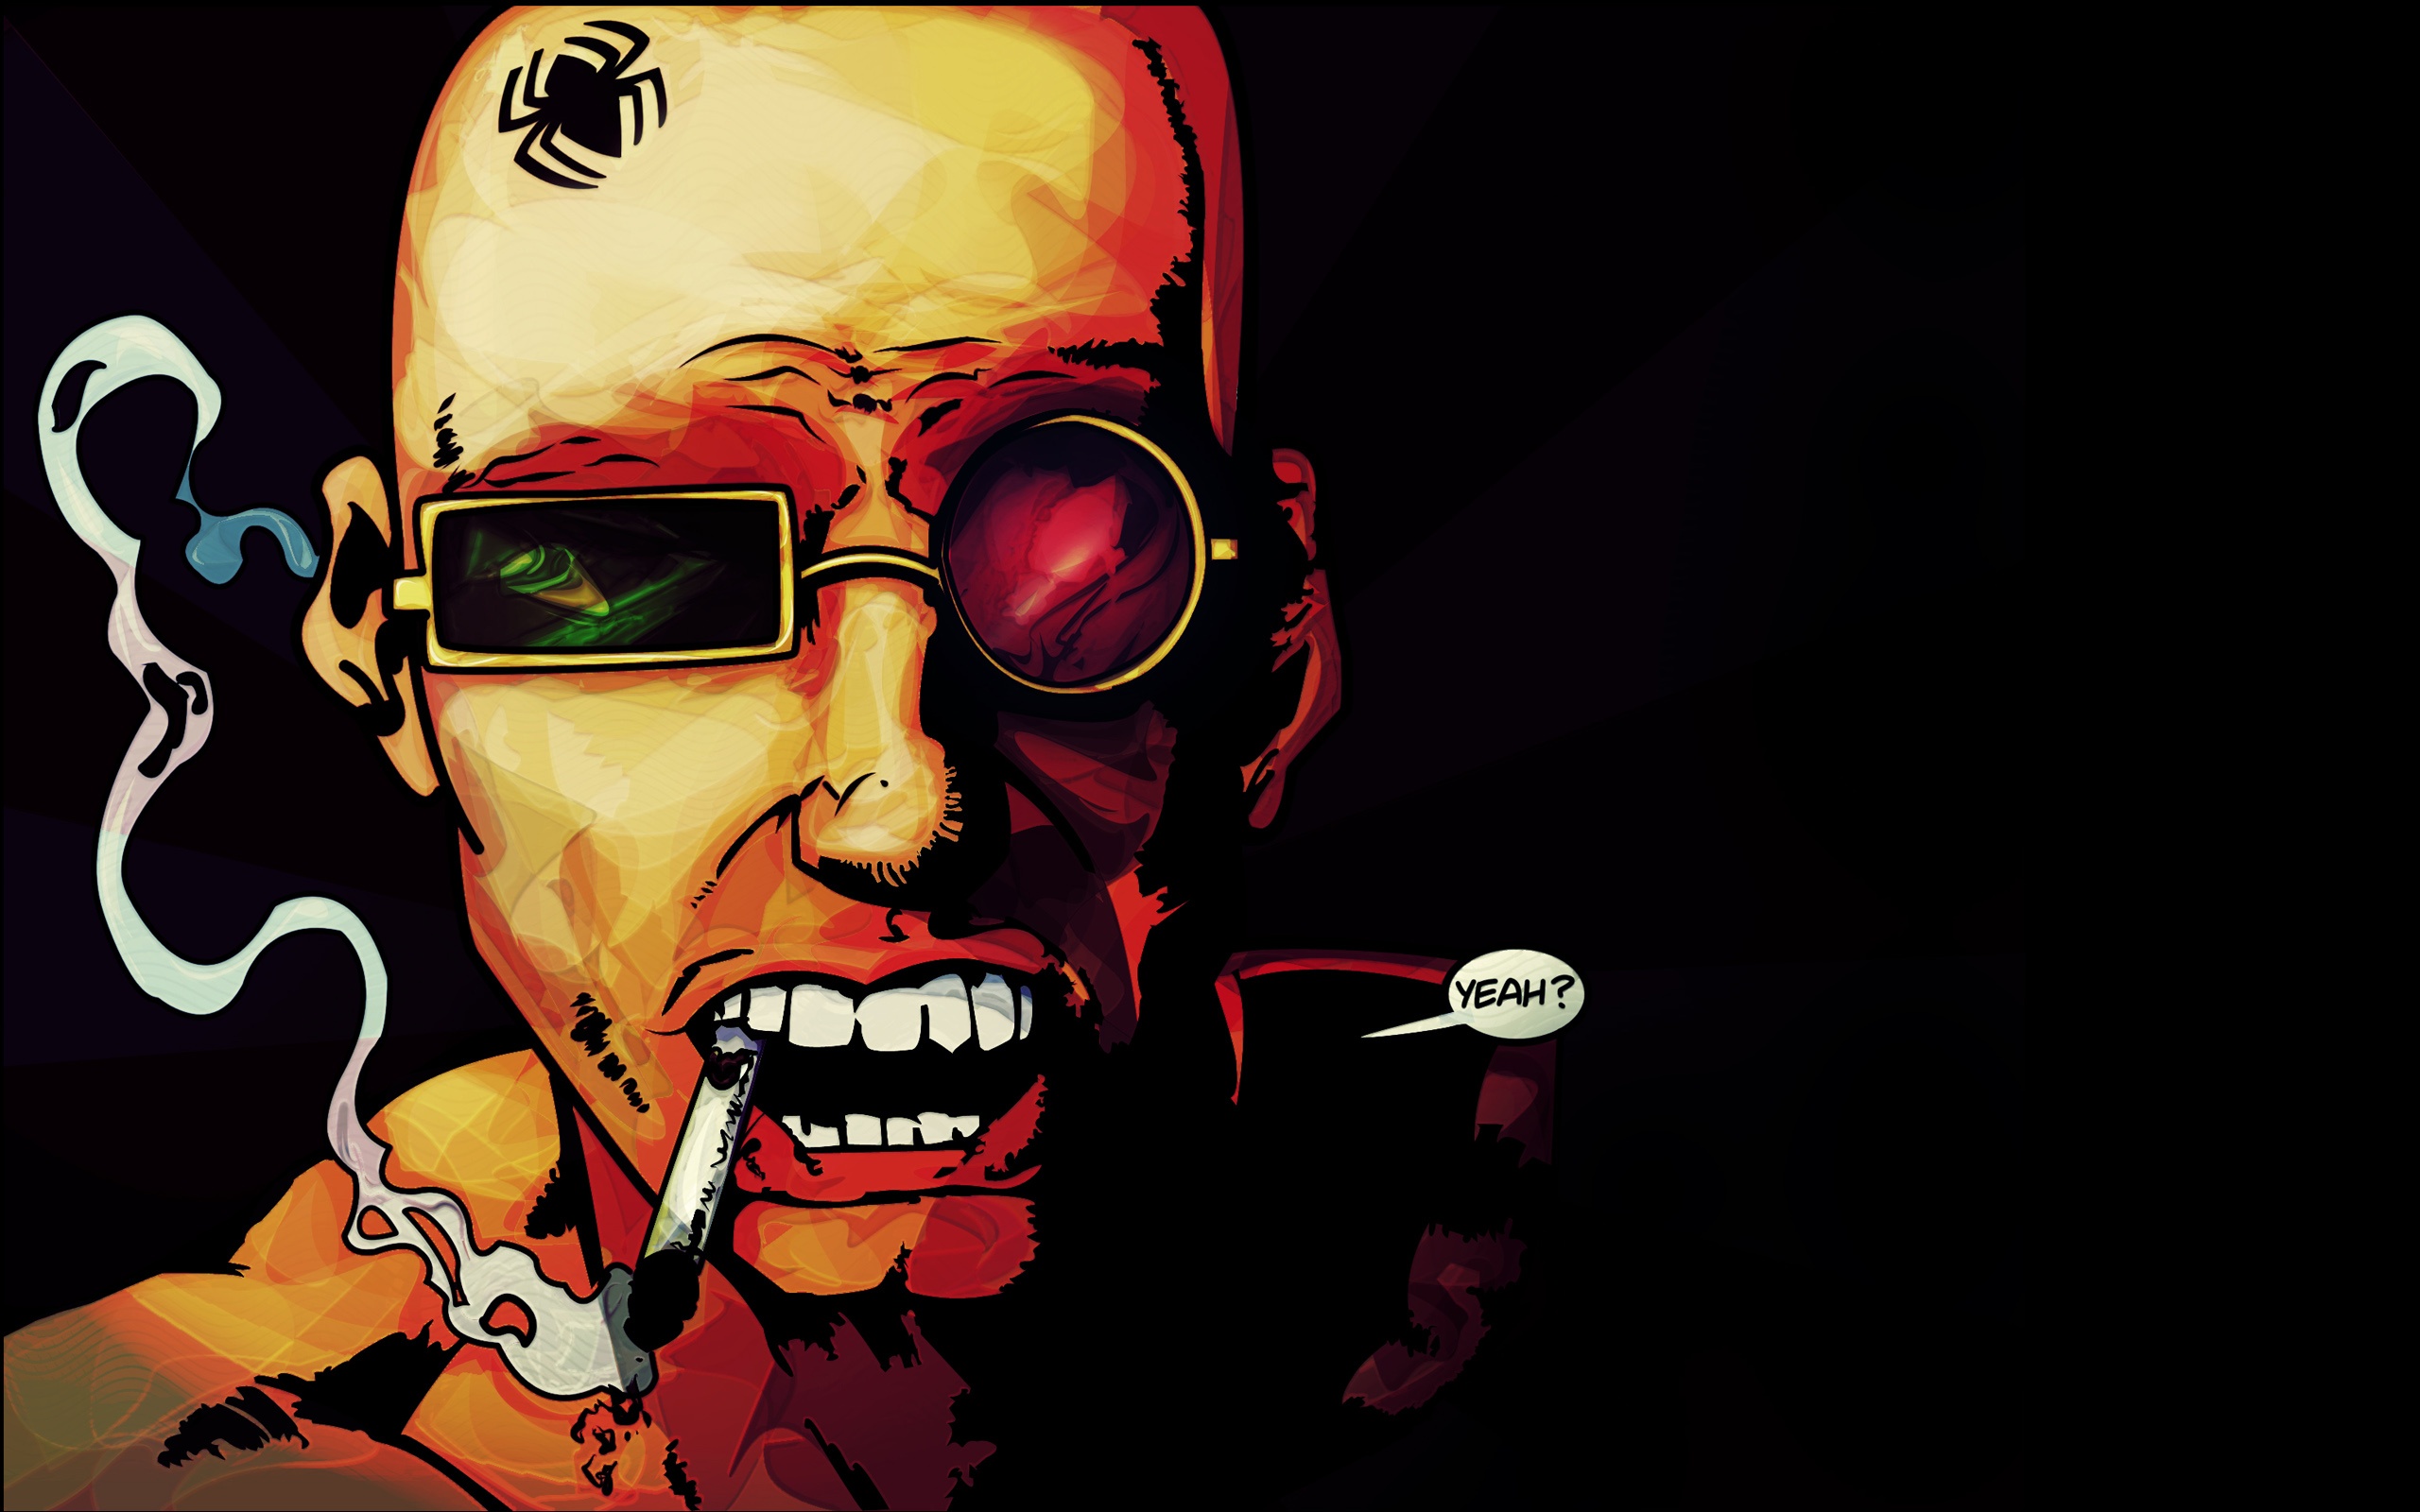 Spider Jerusalem, the iconic character from the comic series Transmetropolitan, depicted on a desktop wallpaper. #Comics #Transmetropolitan #SpiderJerusalem